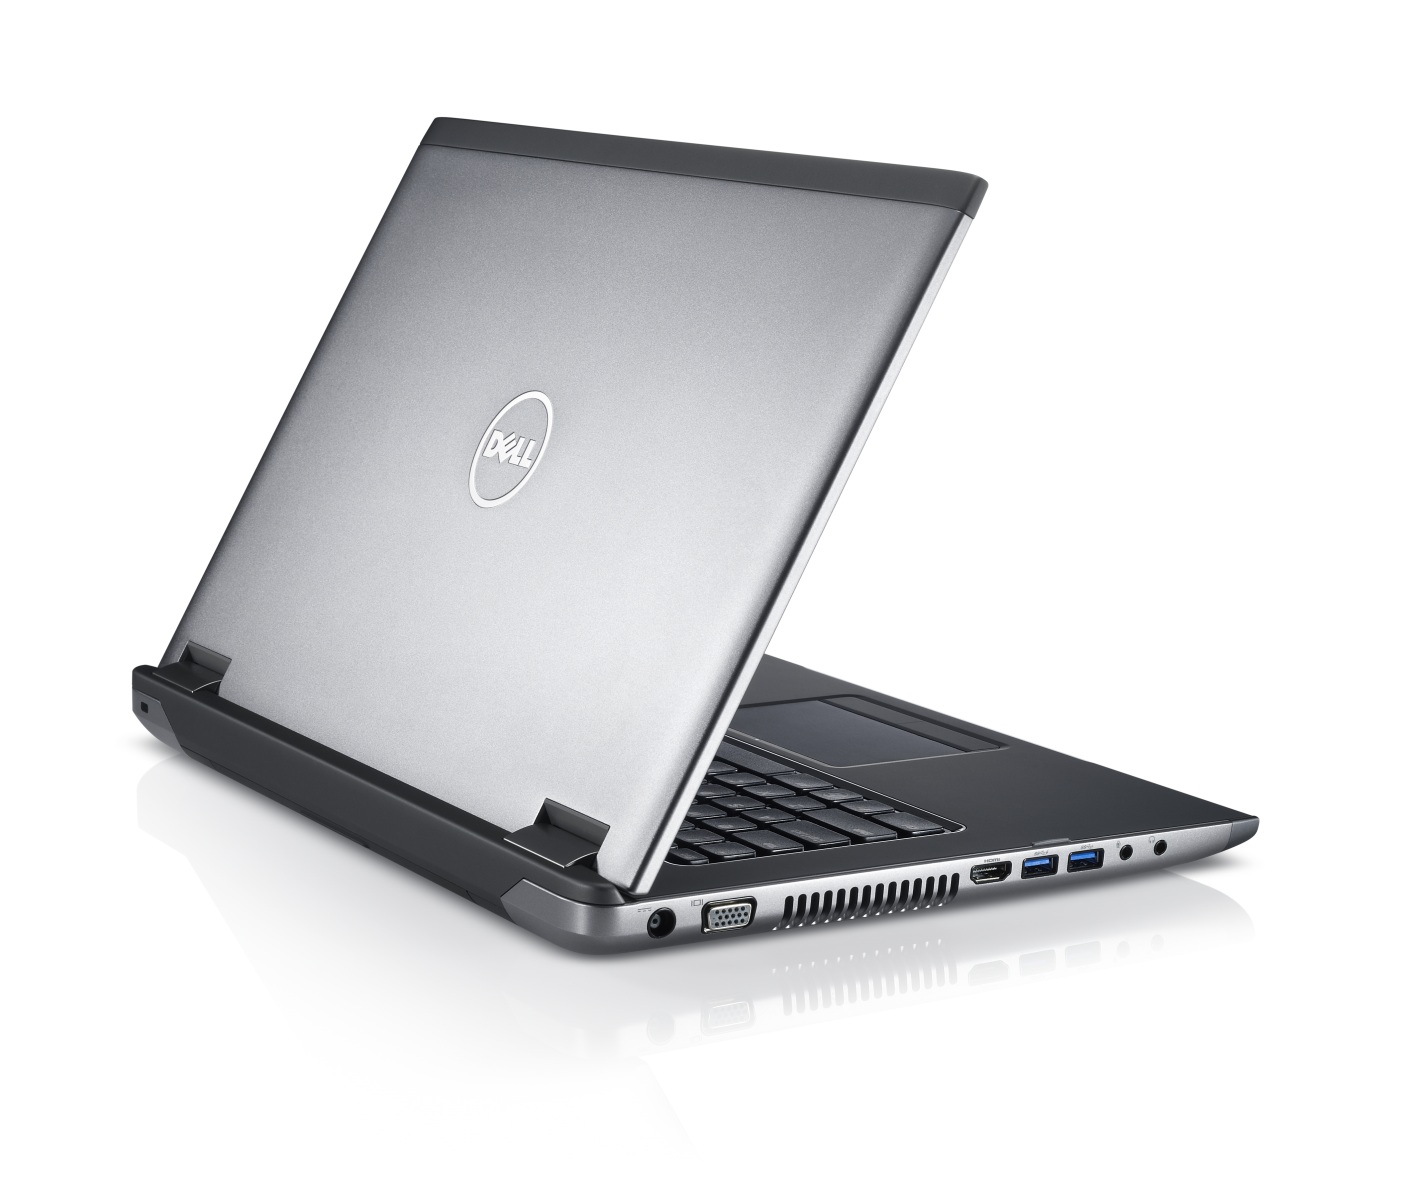 Dell refreshes product lines for businesses